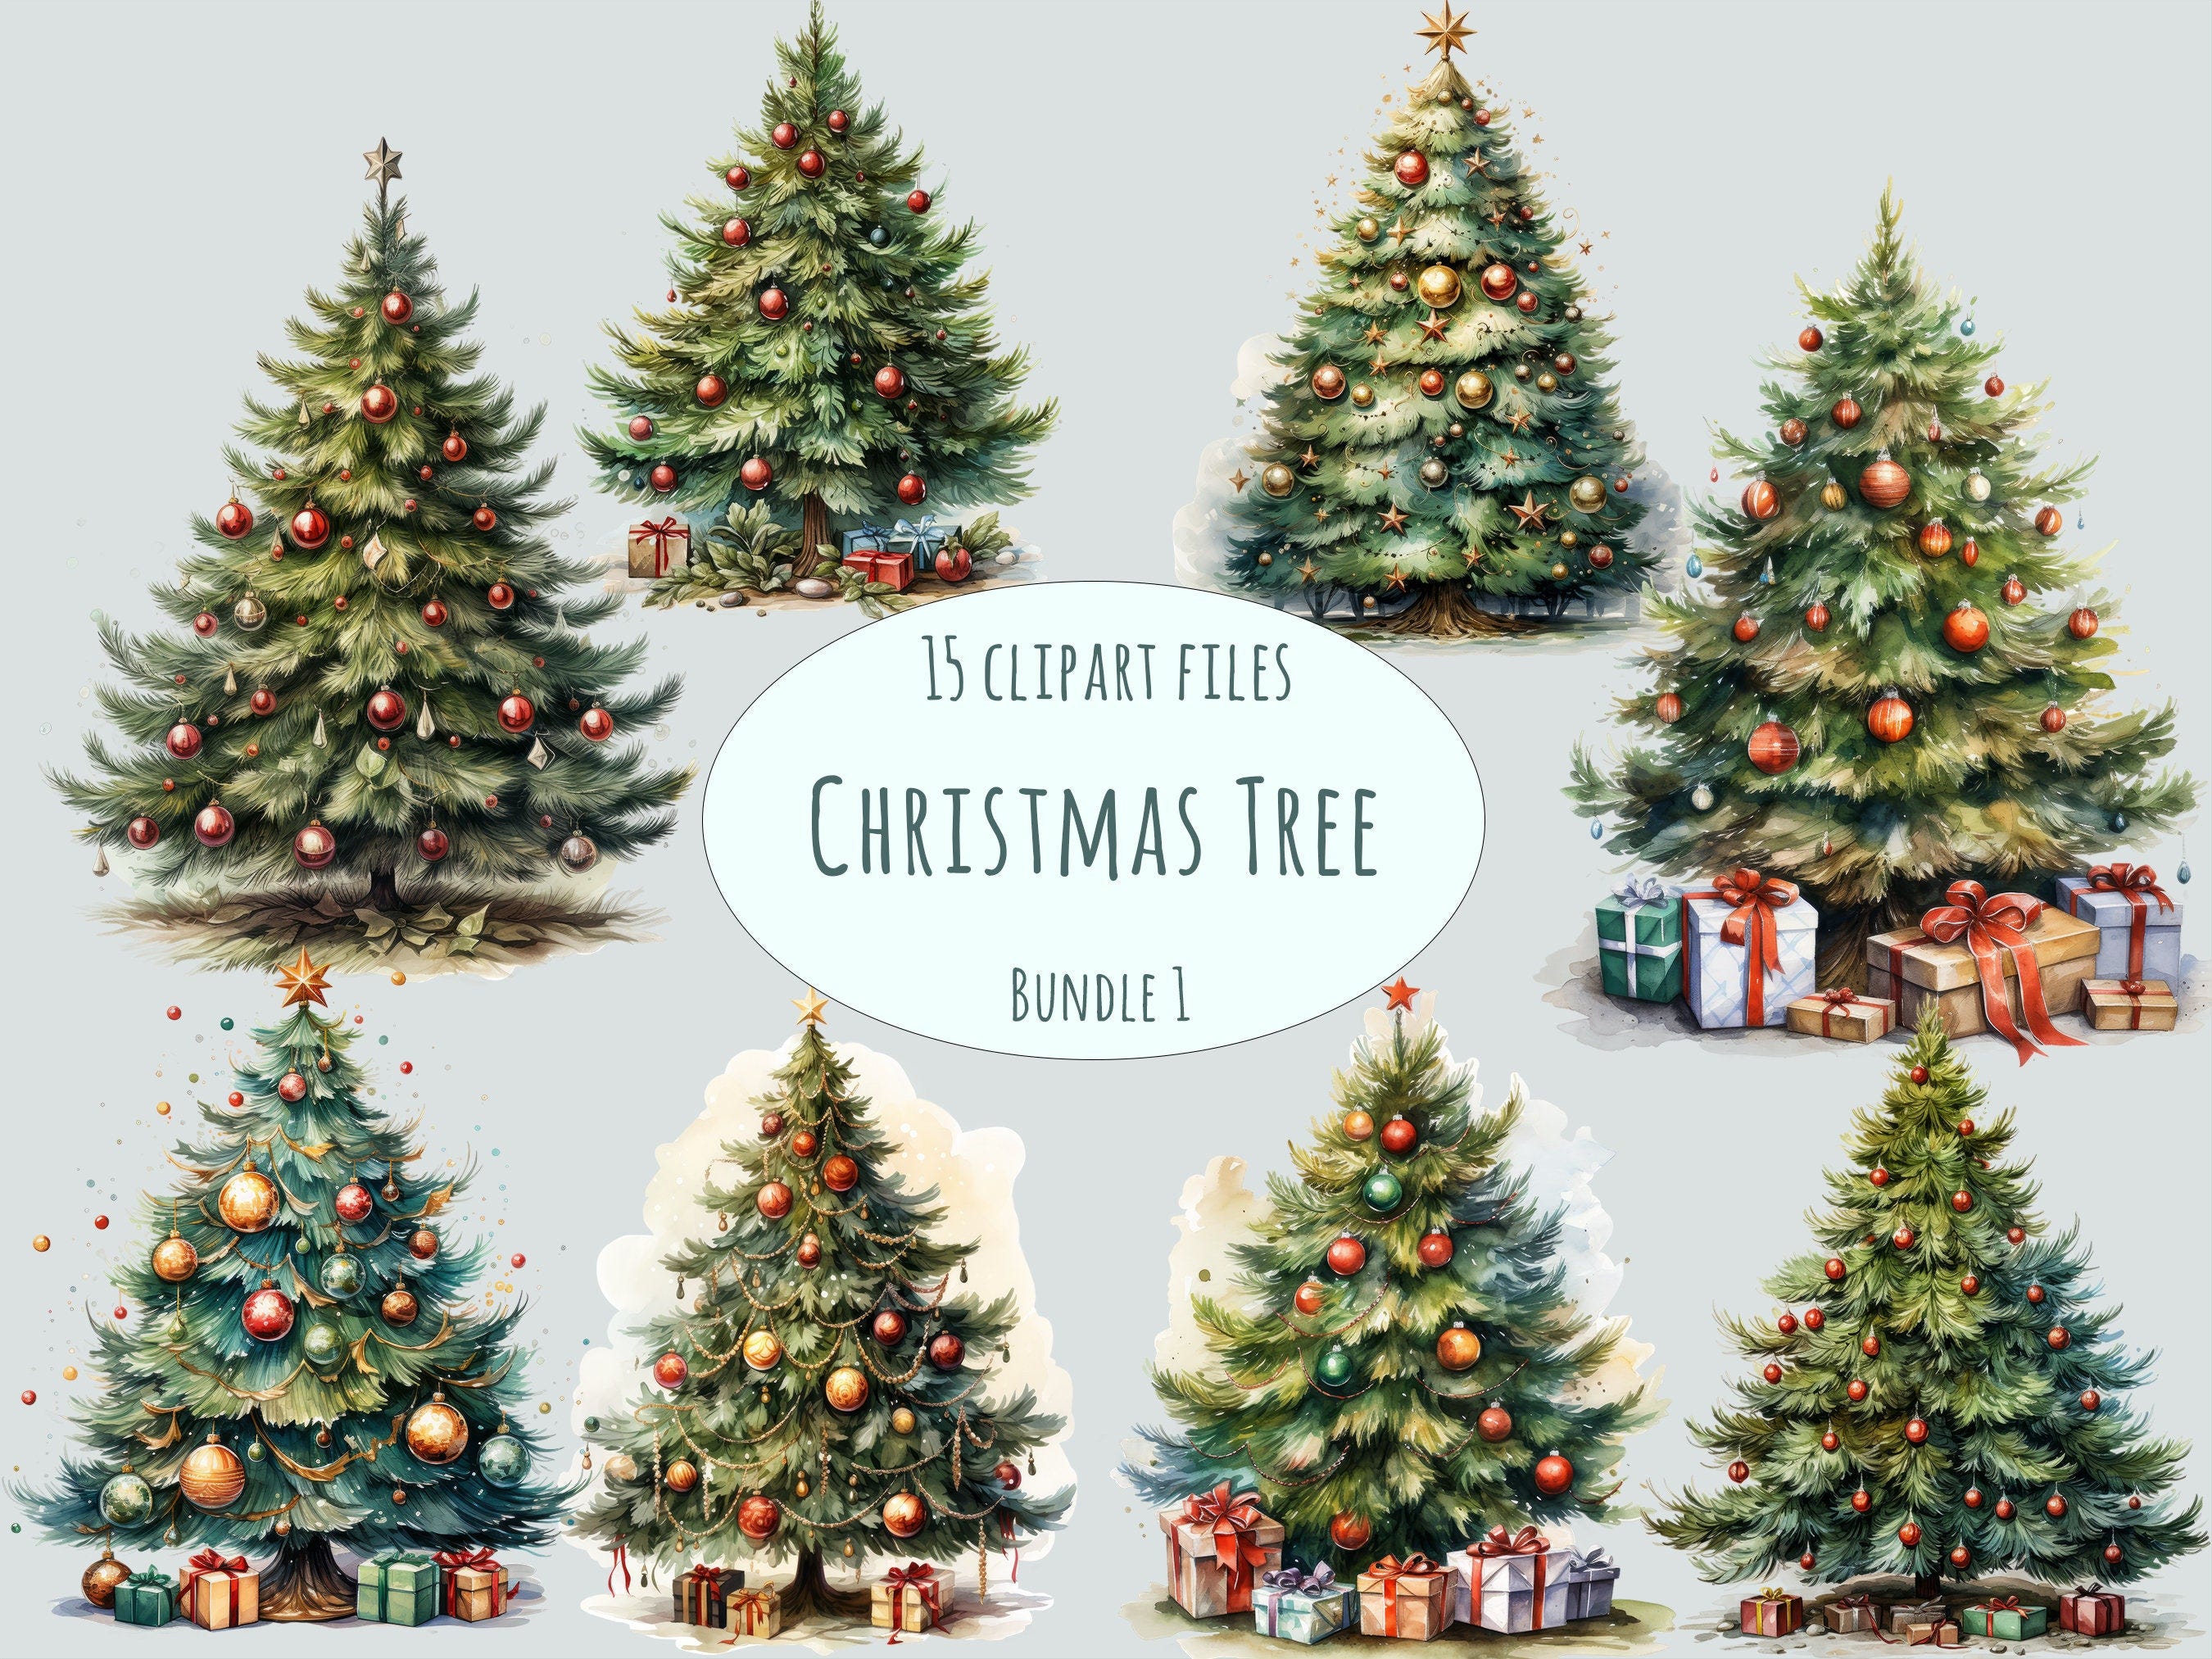 Christmas tree clipart, 15 Watercoor evergreen fir tree, High quality png, Pine tree with baubles illustration, card making printable